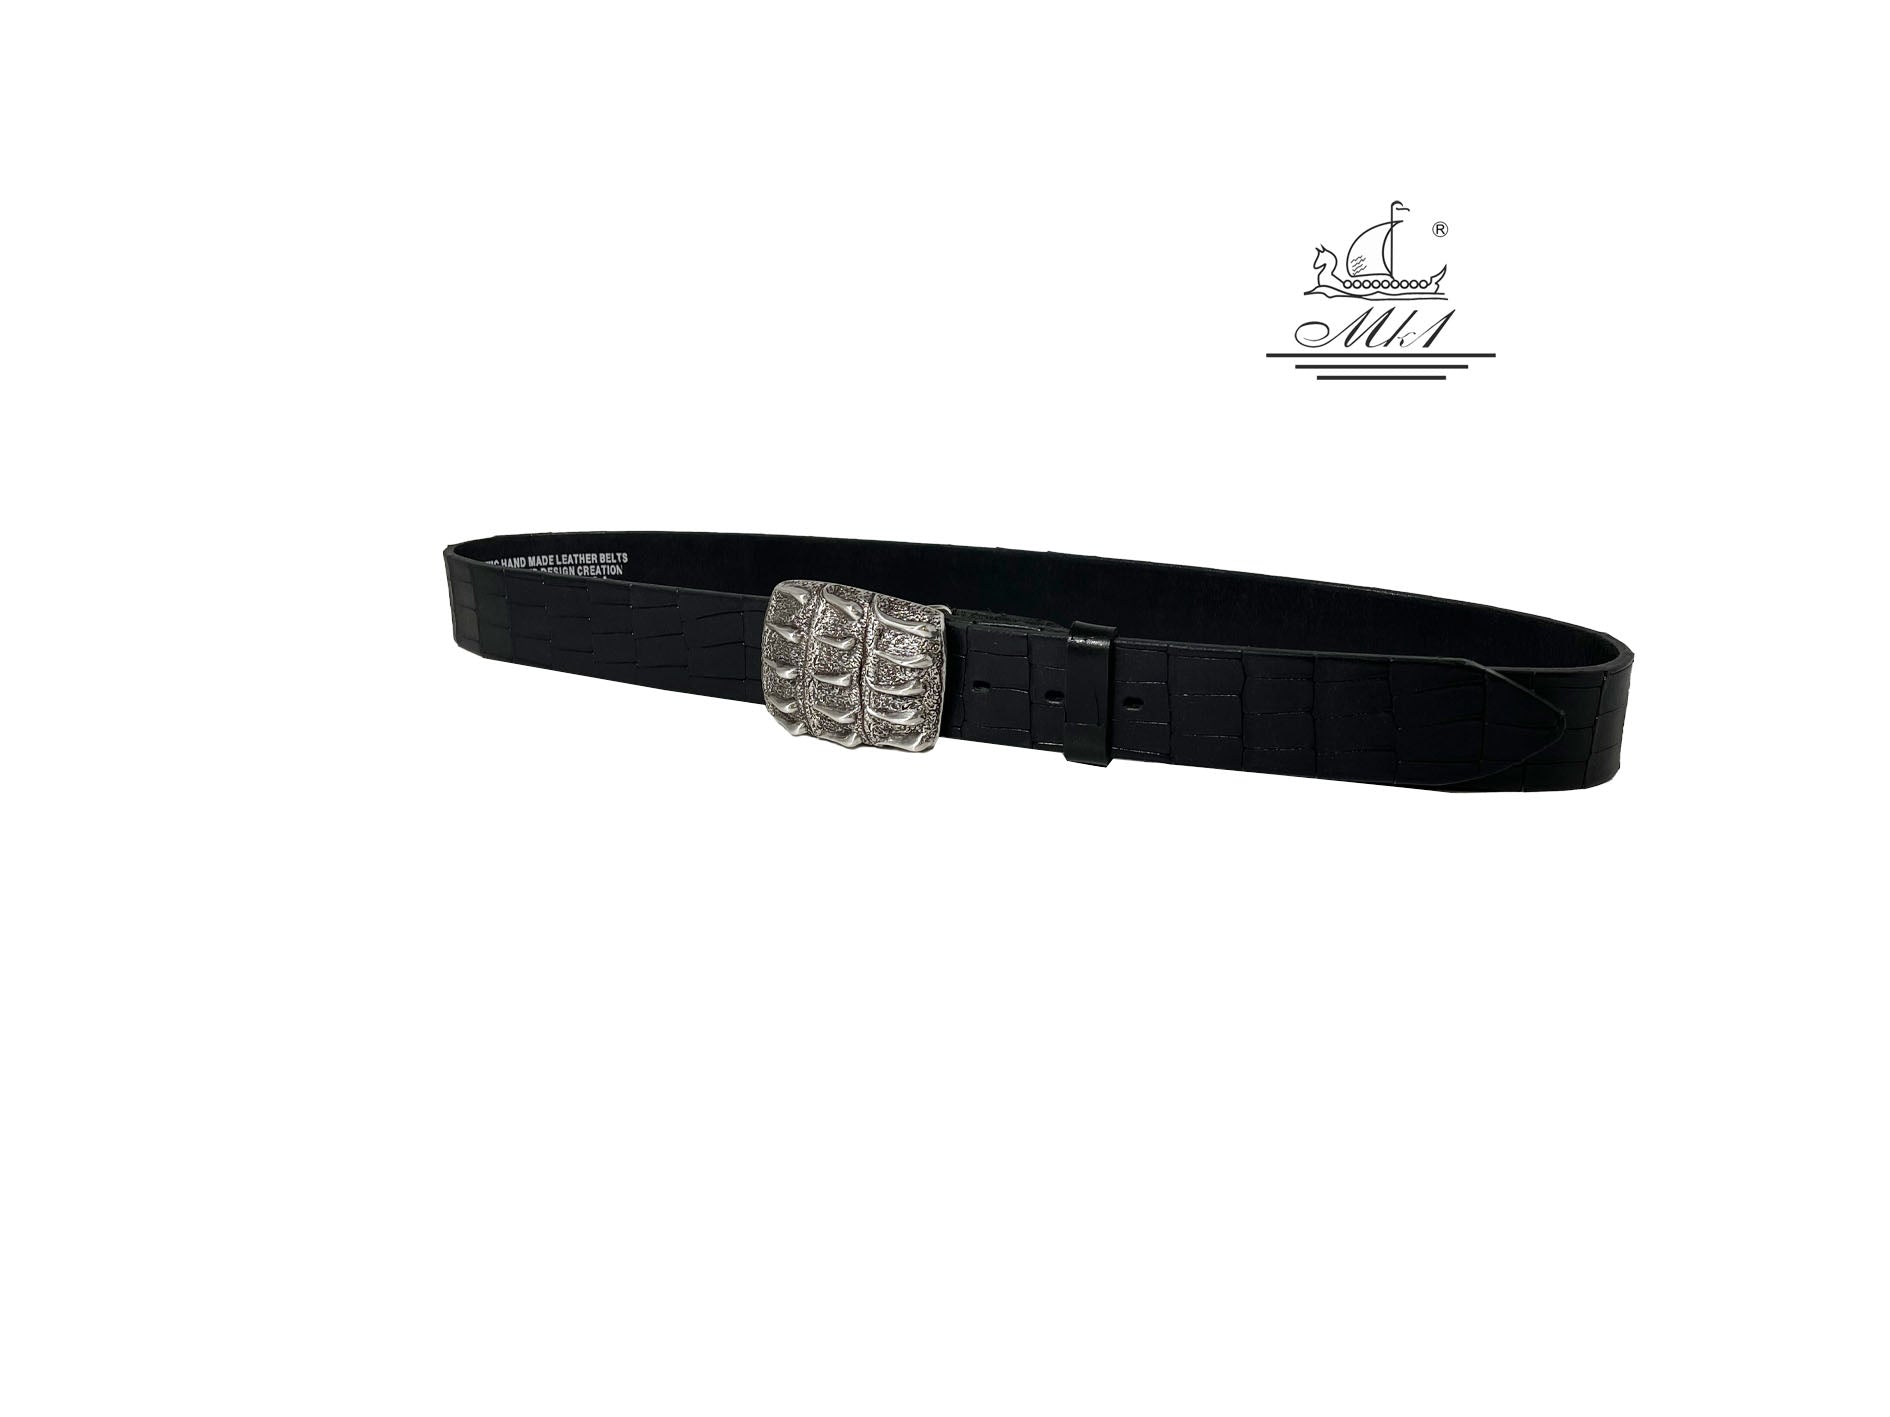 Unisex 4cm wide belt handcrafted from black leather with croco design. 100940/40B/KR